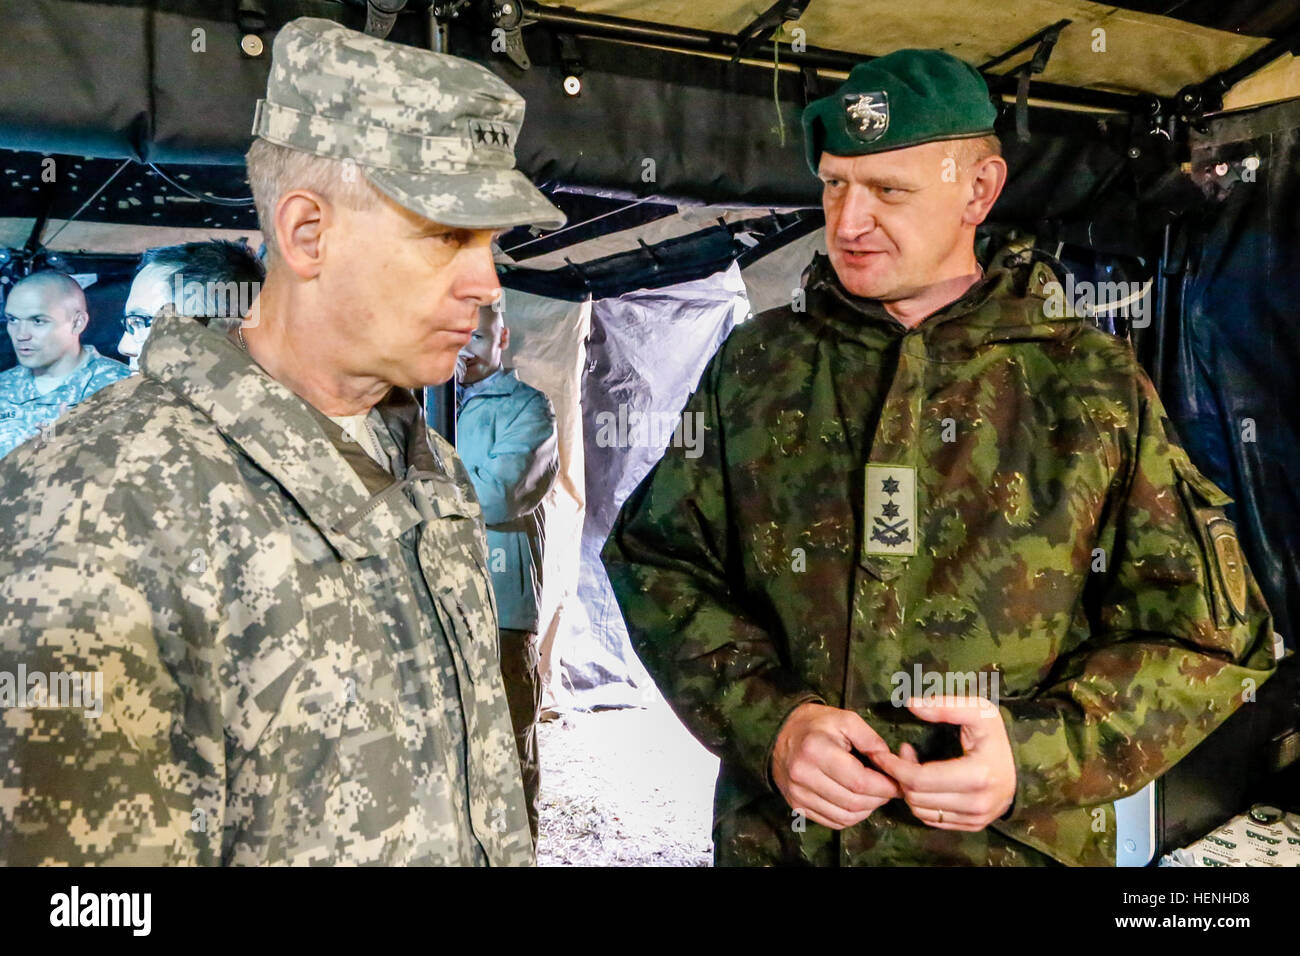 U.S. Army Lt. Gen. Donald M. Campbell, left, commanding general of U.S. Army Europe, and Lithuanian Maj. Gen. Leika Almantas, commander of the Lithuanian Land Force, discuss future plans during a visit of the Joint Multinational Readiness Center (JMRC) in Hohenfels, Germany, May 28, 2014.  Senior leaders visited the JMRC in order to observe training during Combined Resolve II, a multinational decisive action training environment exercise that involves more than 4,000 participants from 15 partner nations.  The intent of the exercise is to train and prepare a U.S. led multinational brigade to in Stock Photo